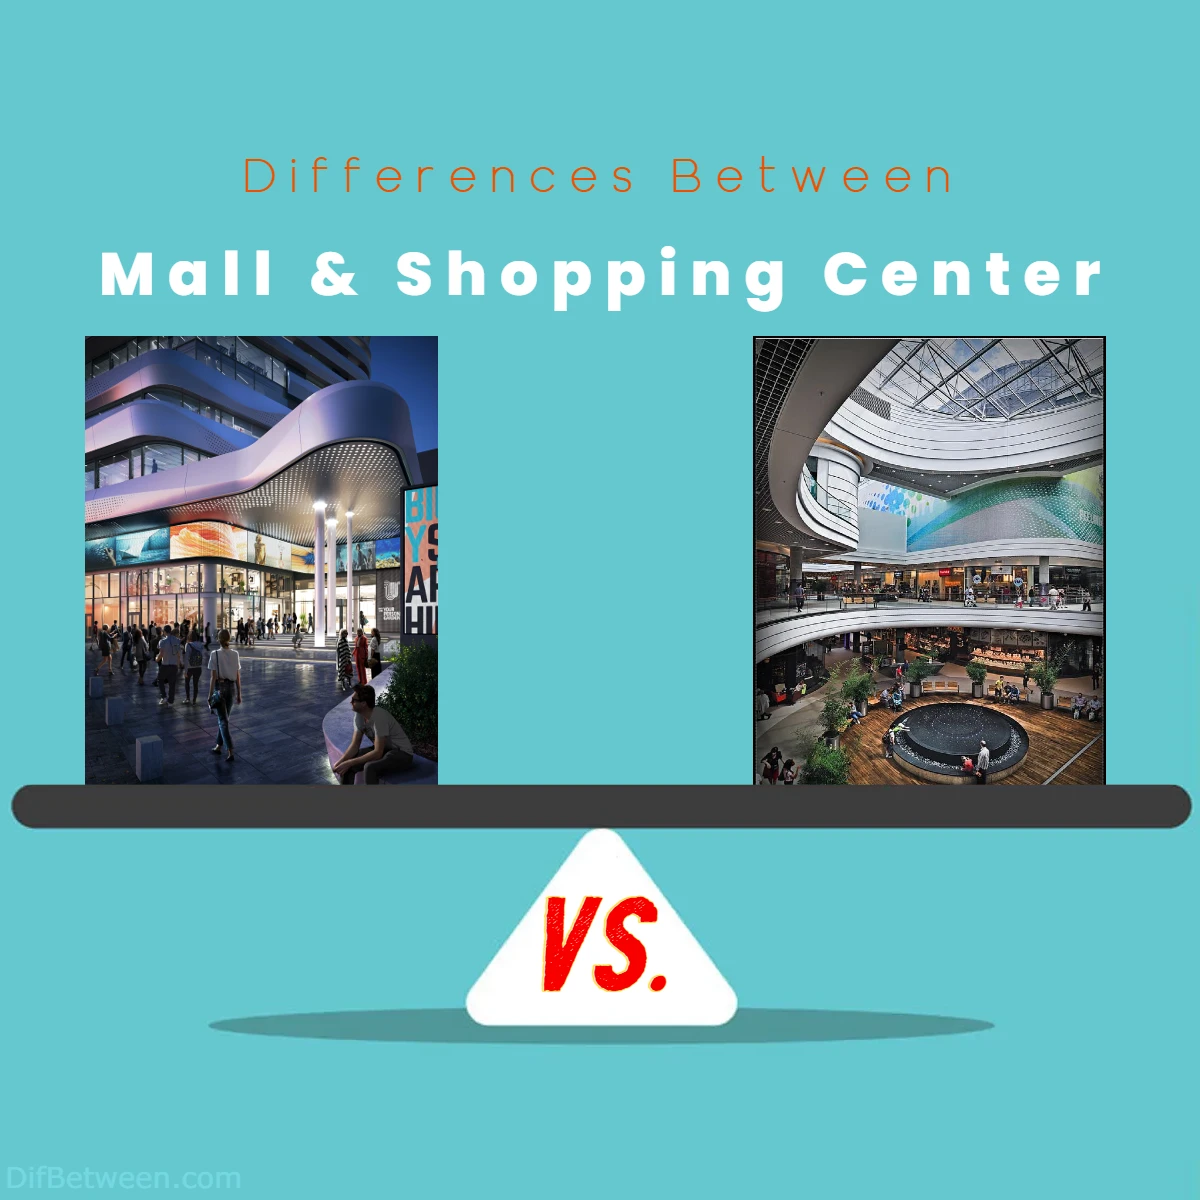 Differences Between Mall vs Shopping Center